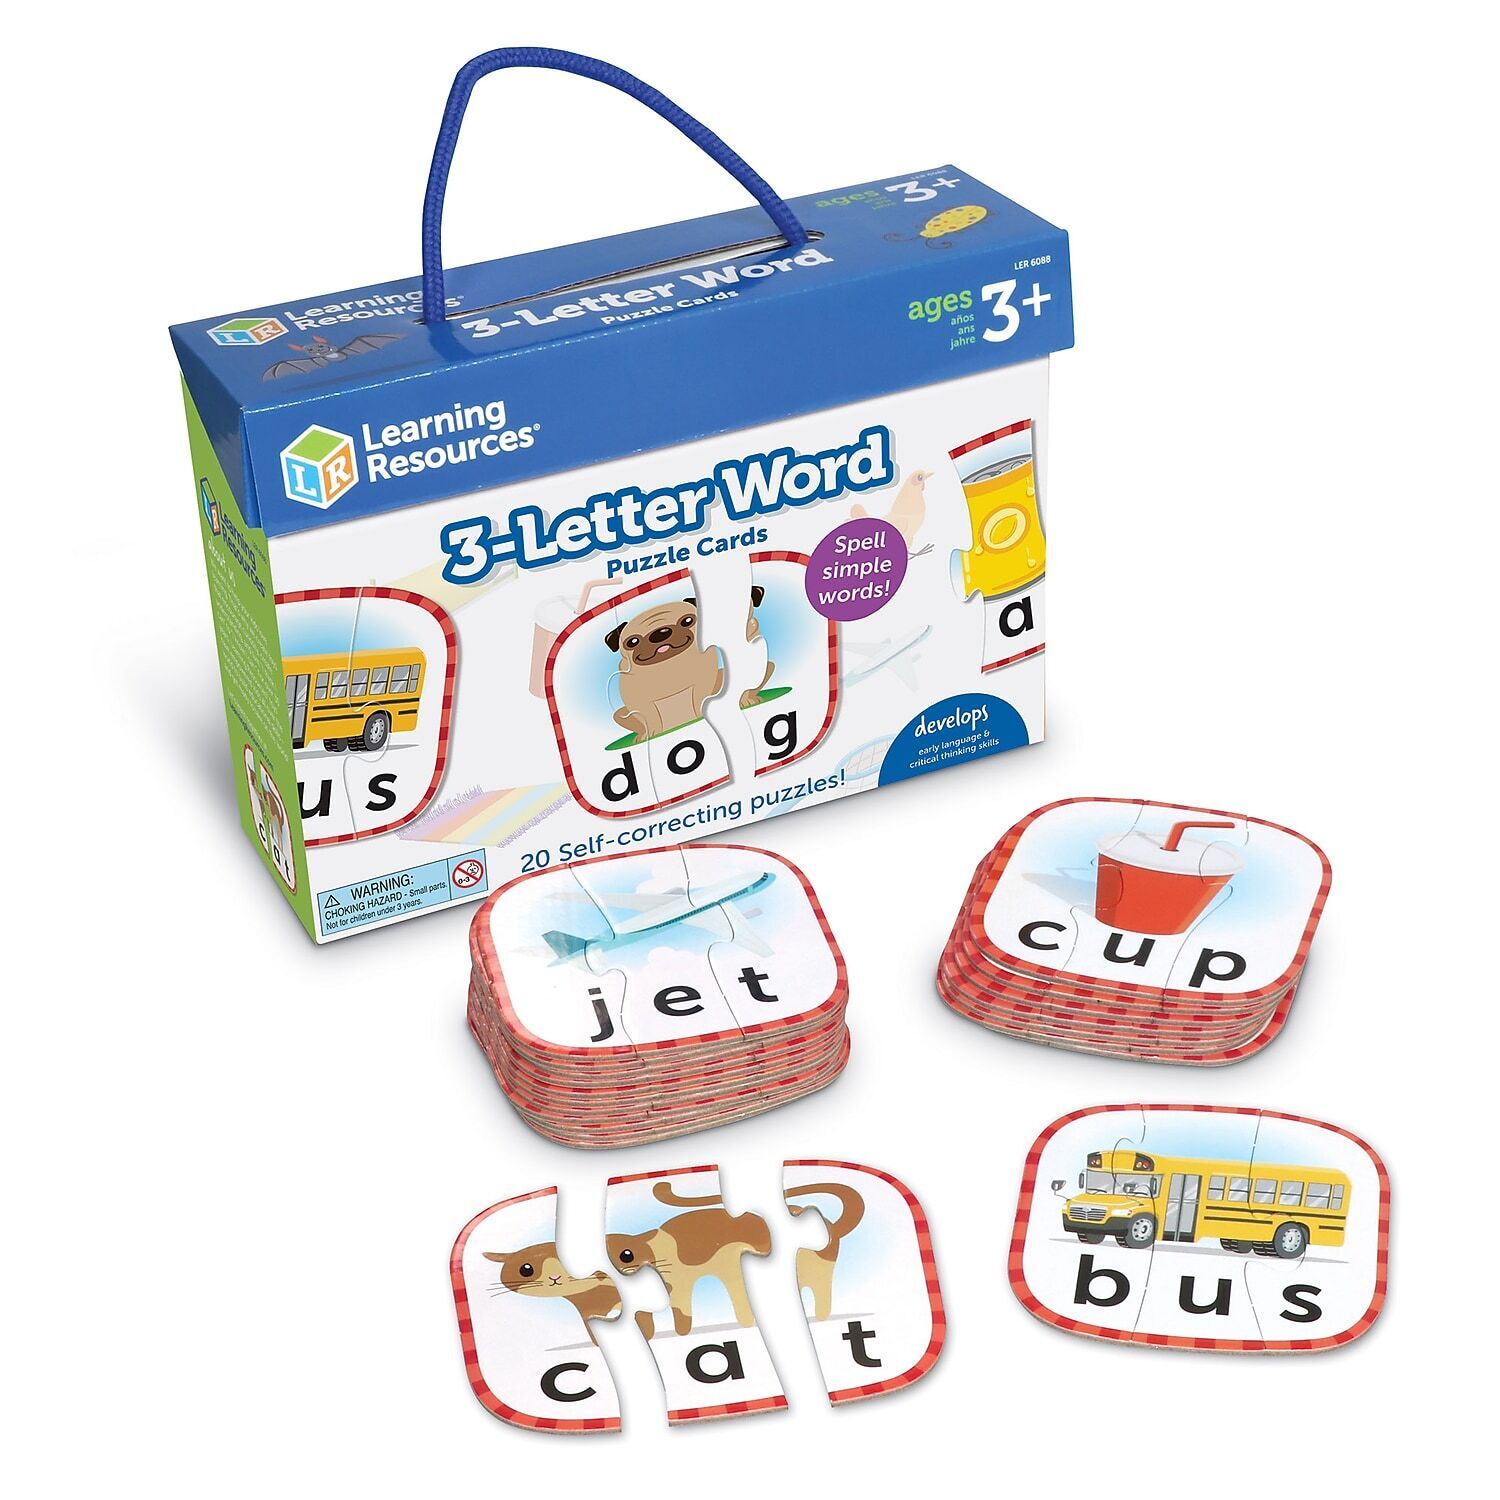 Learning Resources 3-Letter Word Puzzle Cards Self Correcting Puzzles